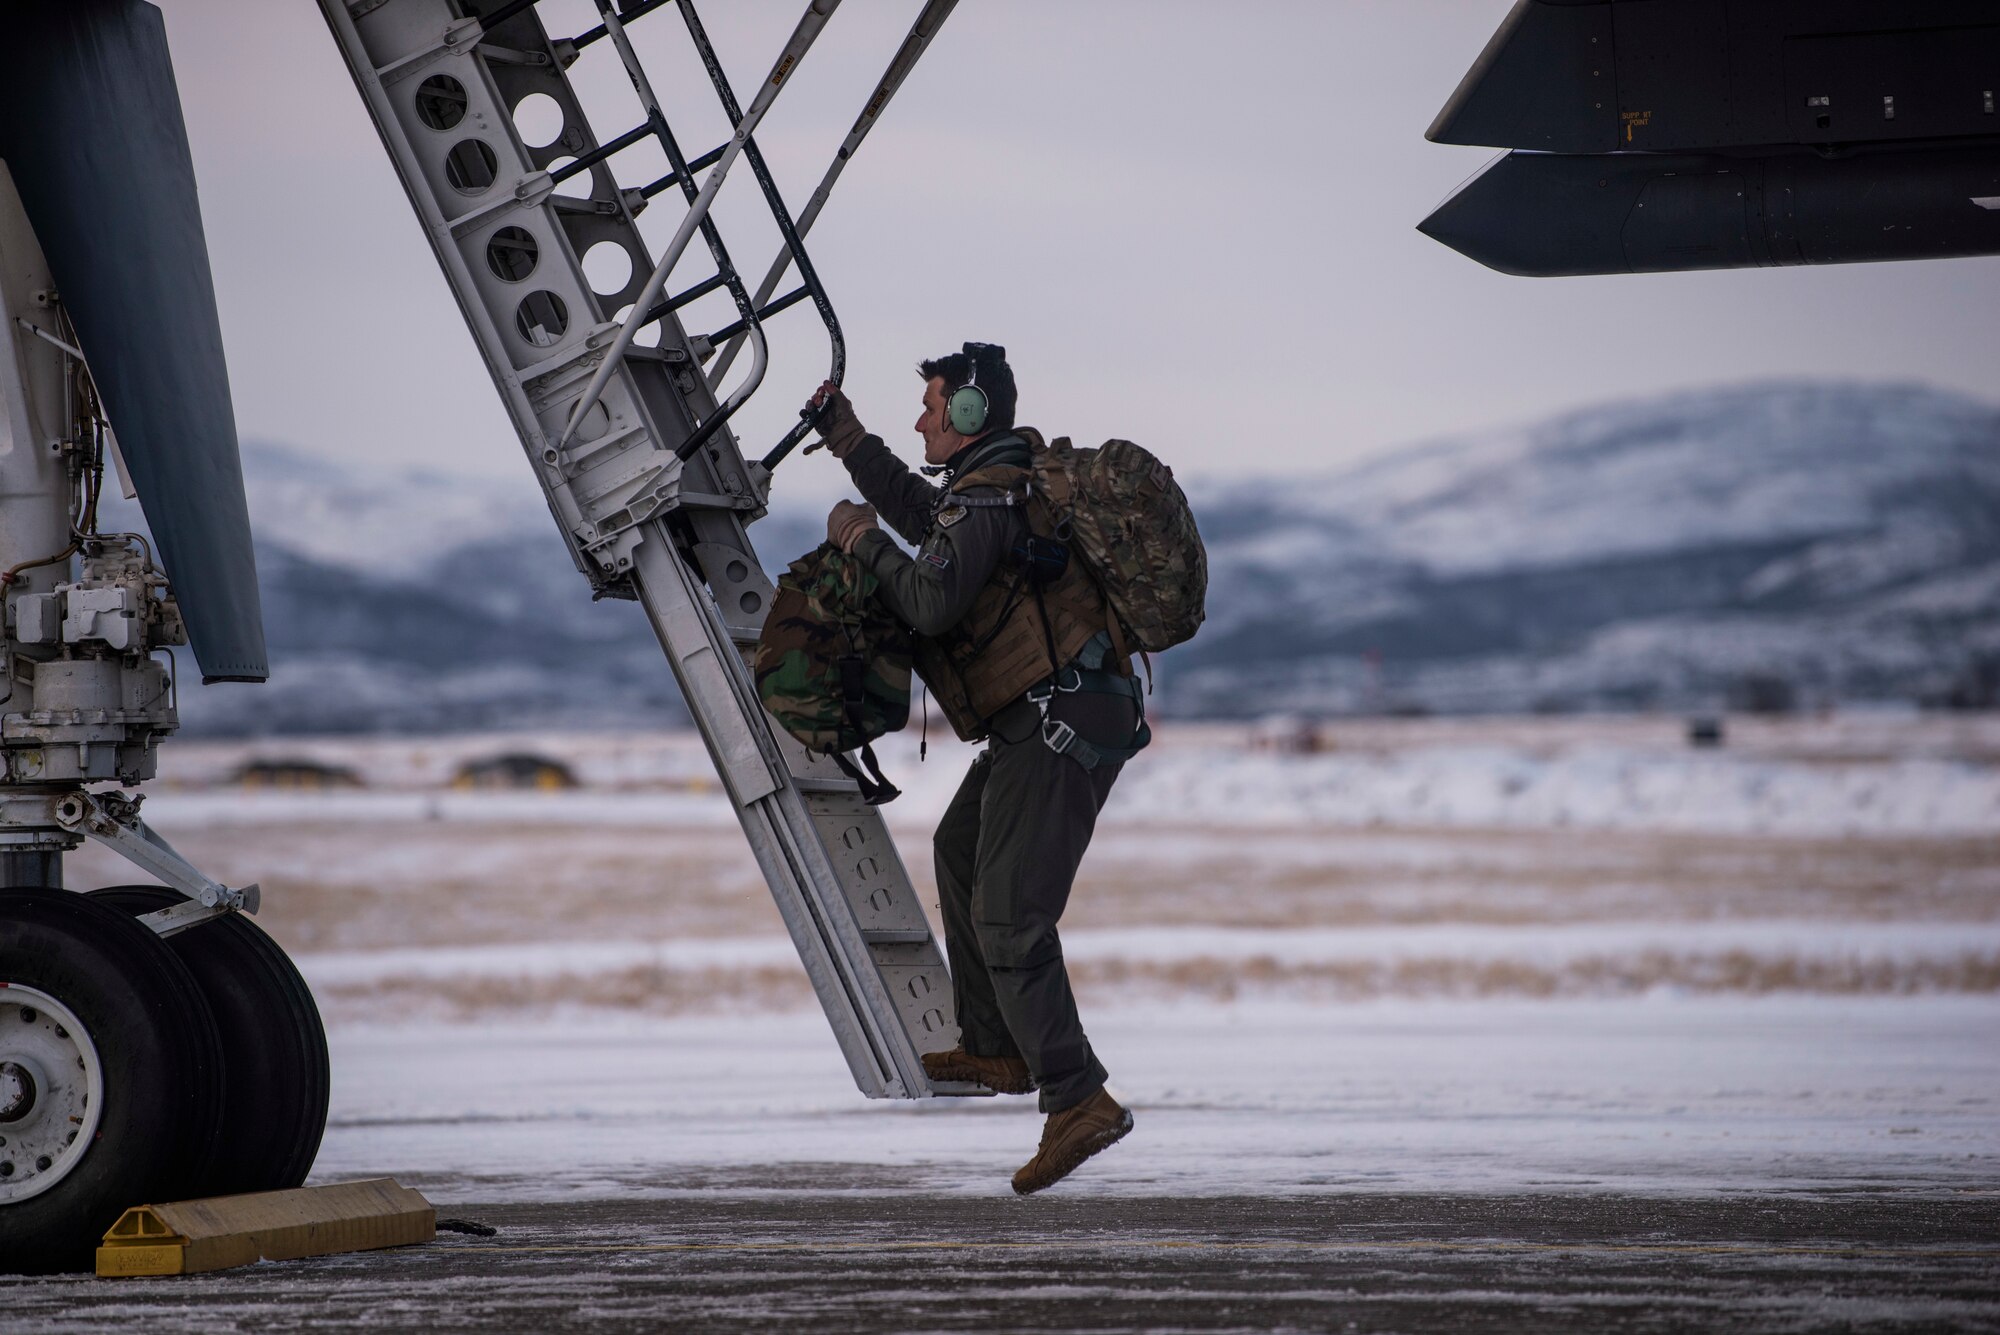 A 9th Expeditionary Bomb Squadron pilot boards a B-1B bomber at Ørland Air Force Station, Norway, March 8, 2020. The aircrew participated in the Bomber Task Force Europe training mission, Agile Condor, where they flew from Ørland AFS to Bodø AFS, Norway to conduct warm pit ground refueling. Operating the B-1 out of locations that typically do not support a bomber presence demonstrates strategic Agile Combat Employment capabilities. (U.S. Air Force photo by Airman 1st Class Colin Hollowell)